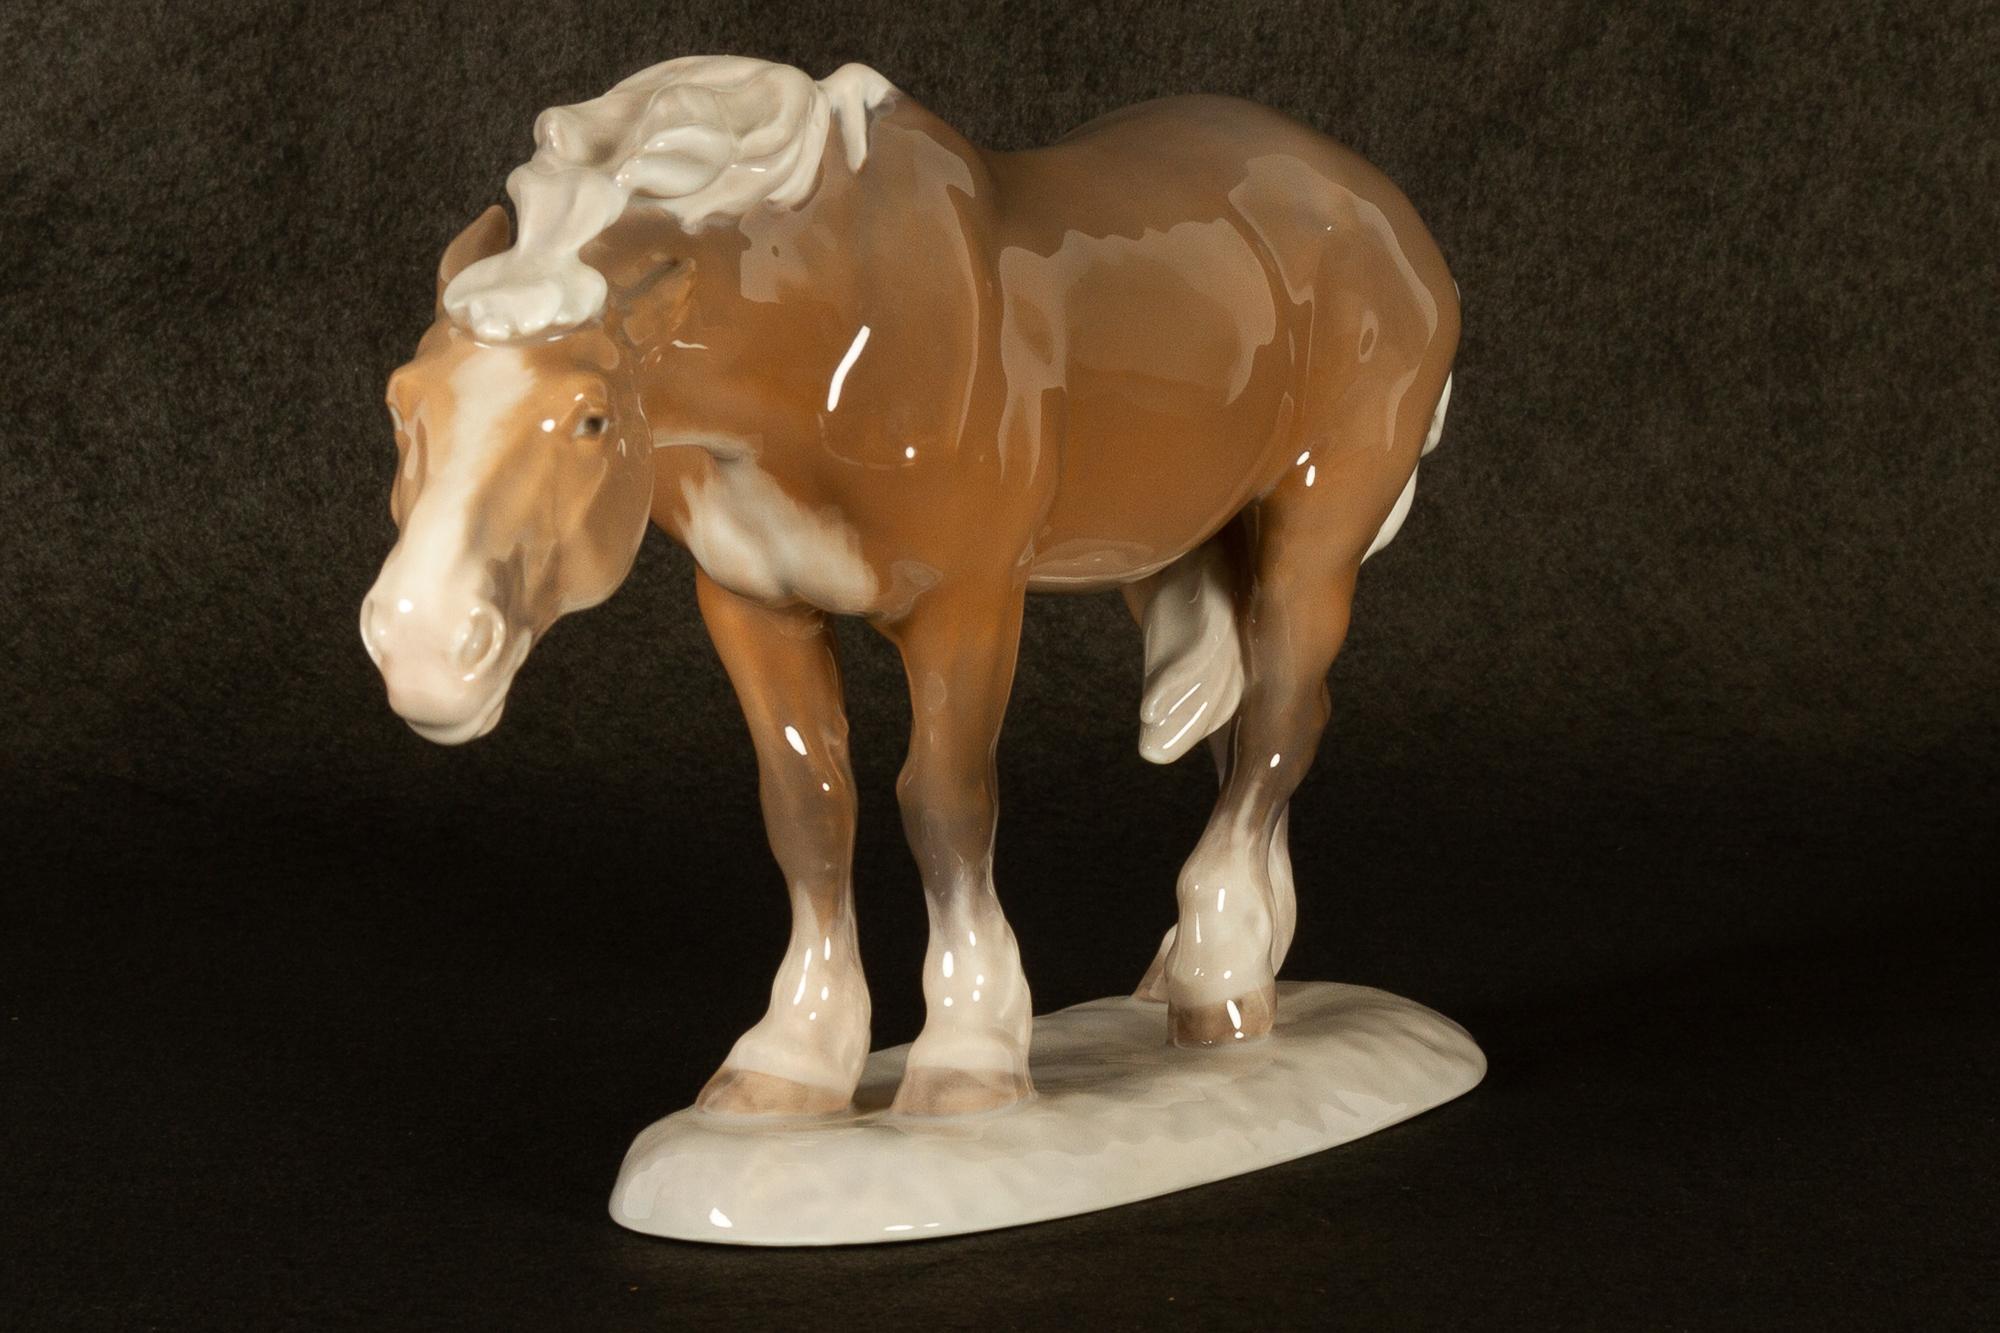 Vintage porcelain horse figurine by Lauritz Jensen for Royal Copenhagen 1968.
Rare figurine designed by Lauritz Jensen in 1912. Made Royal Copenhagen in 1968.
Marked with Royal Copenhagen stamp and model number 1362.
1. factory quality, no flaws